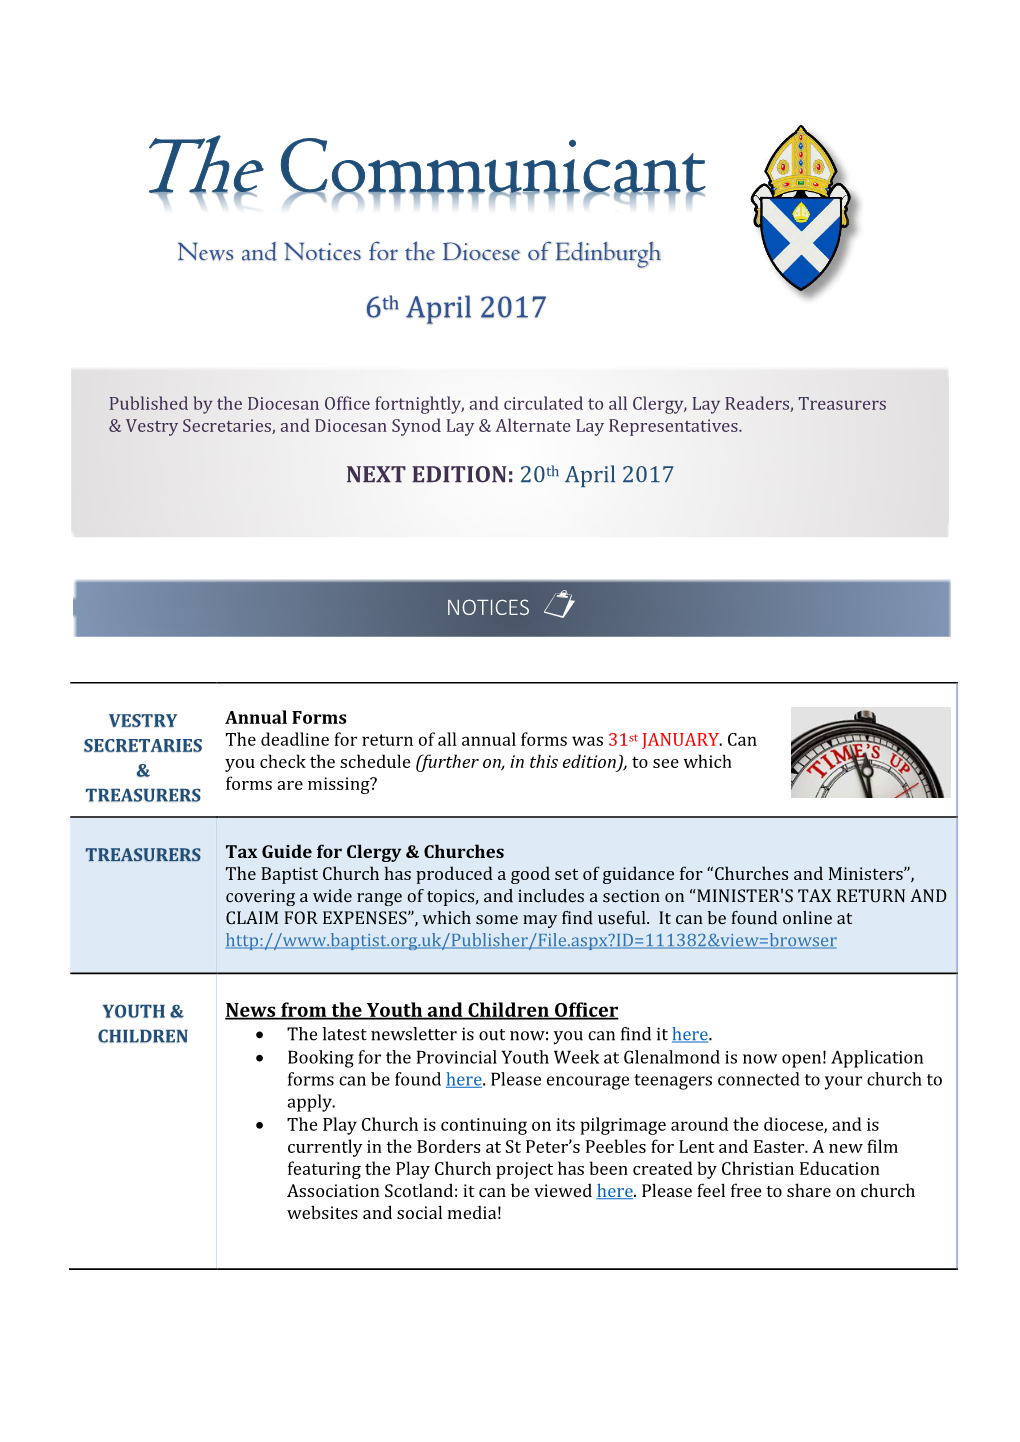 The Communicant News and Notices for the Diocese of Edinburgh 6Th April 2017